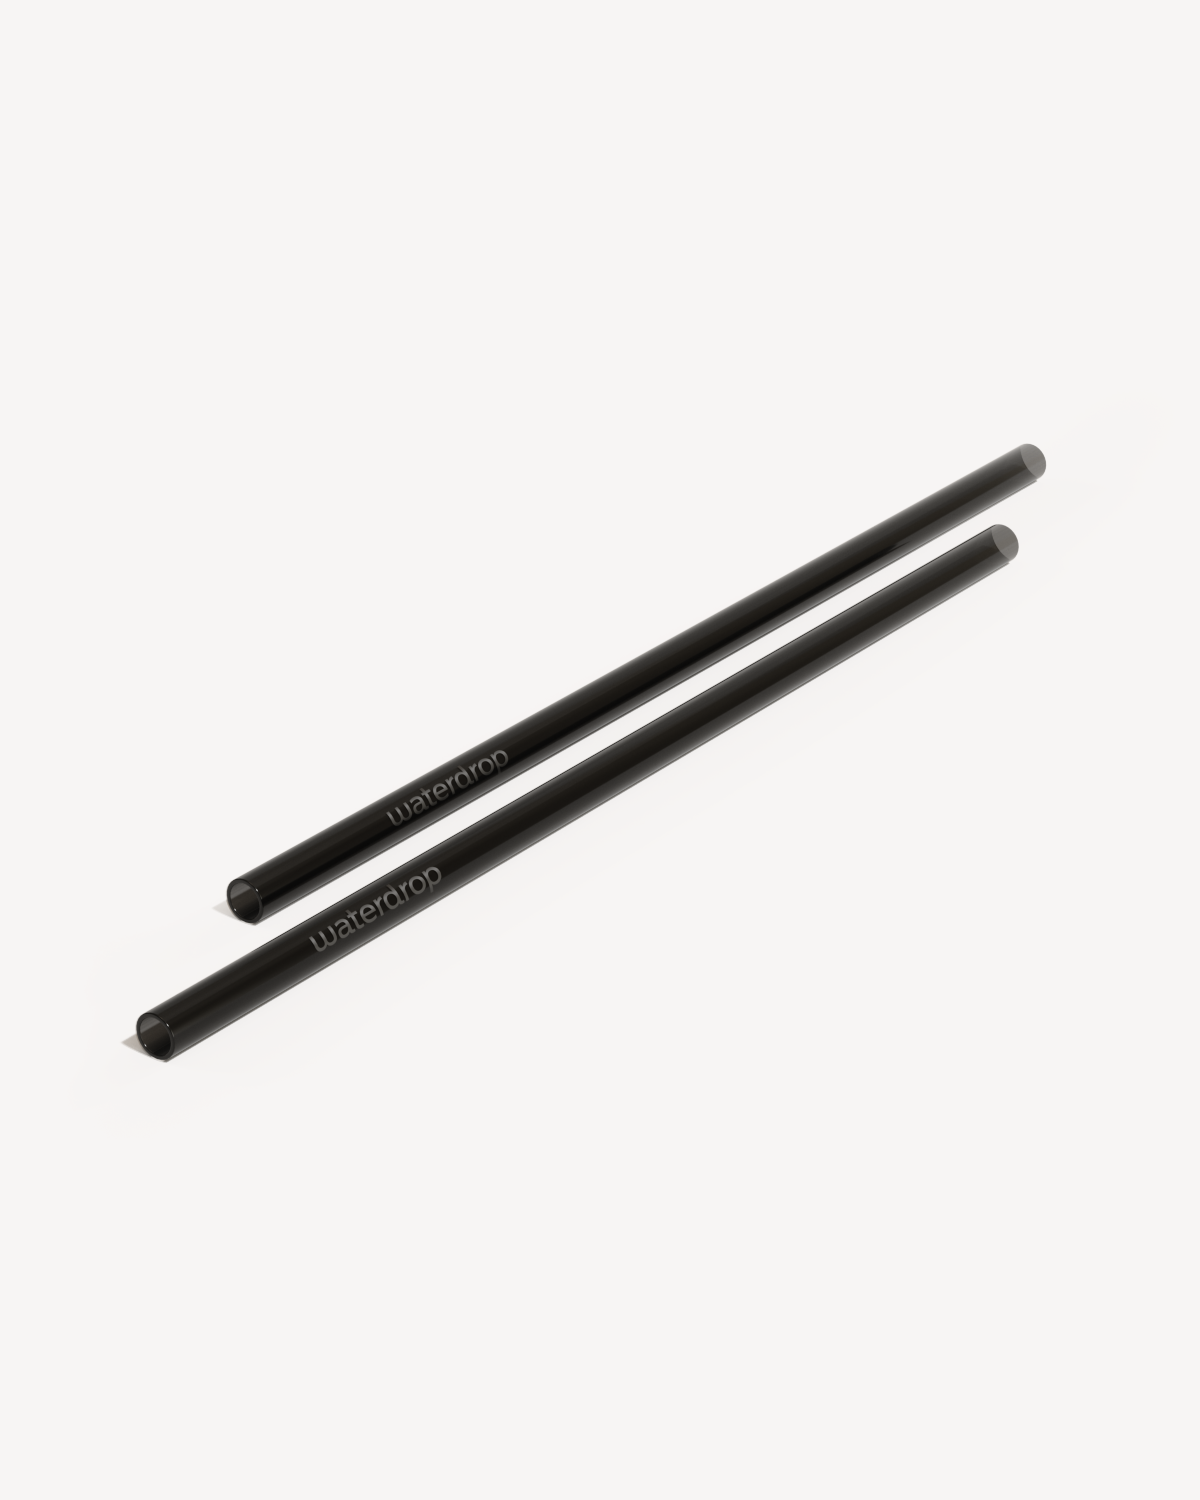 glass straws - single (with cleaning brush)